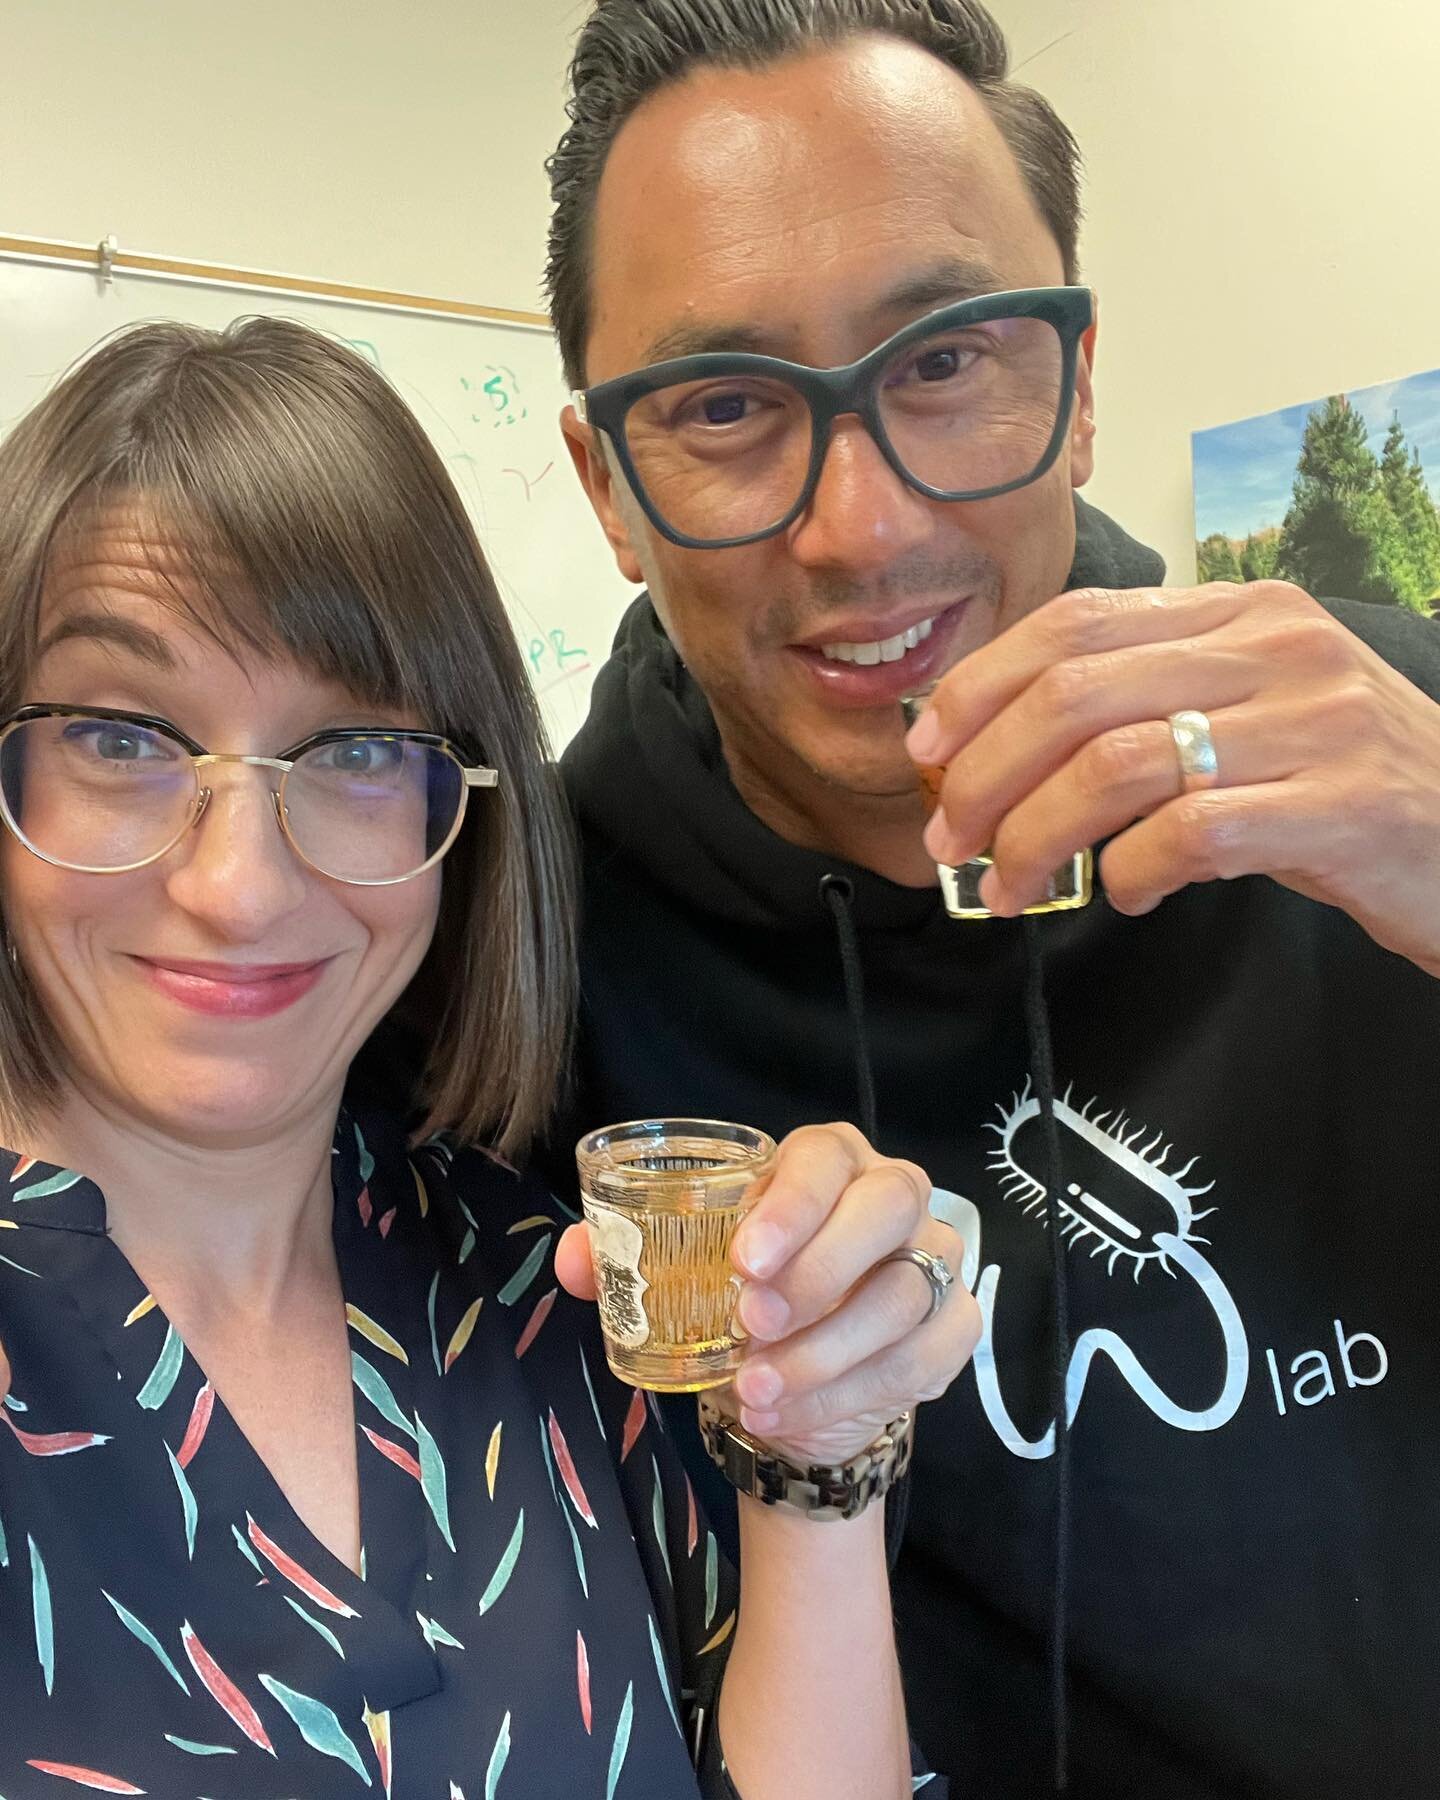 When you need to record an Immunology podcast at 11am on a Monday, Fireball shots help. 🔥